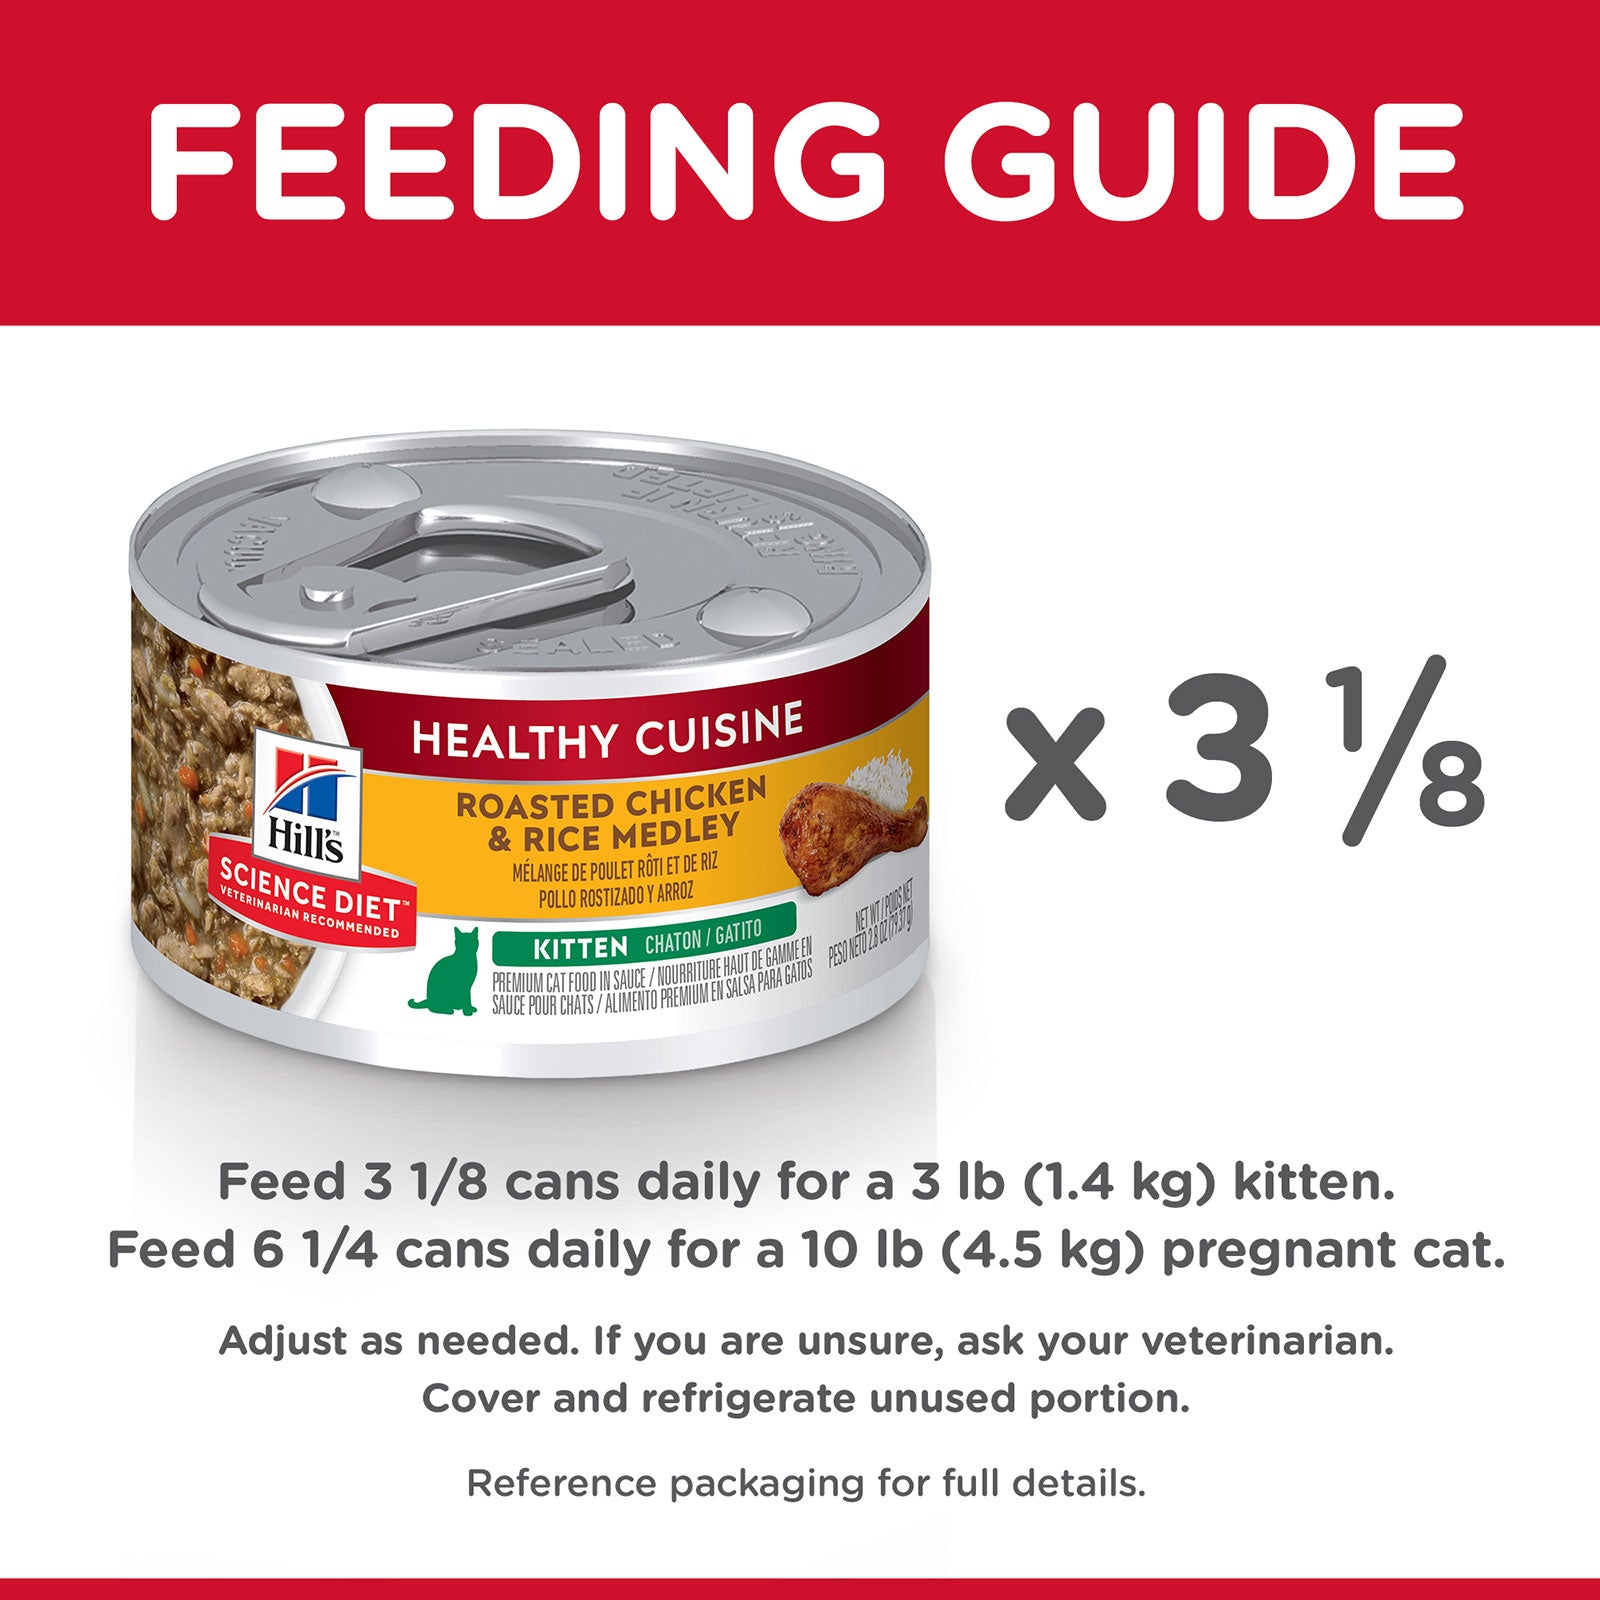 Hill's Science Diet Cat Food Can Kitten Healthy Cuisine Chicken & Rice Medley